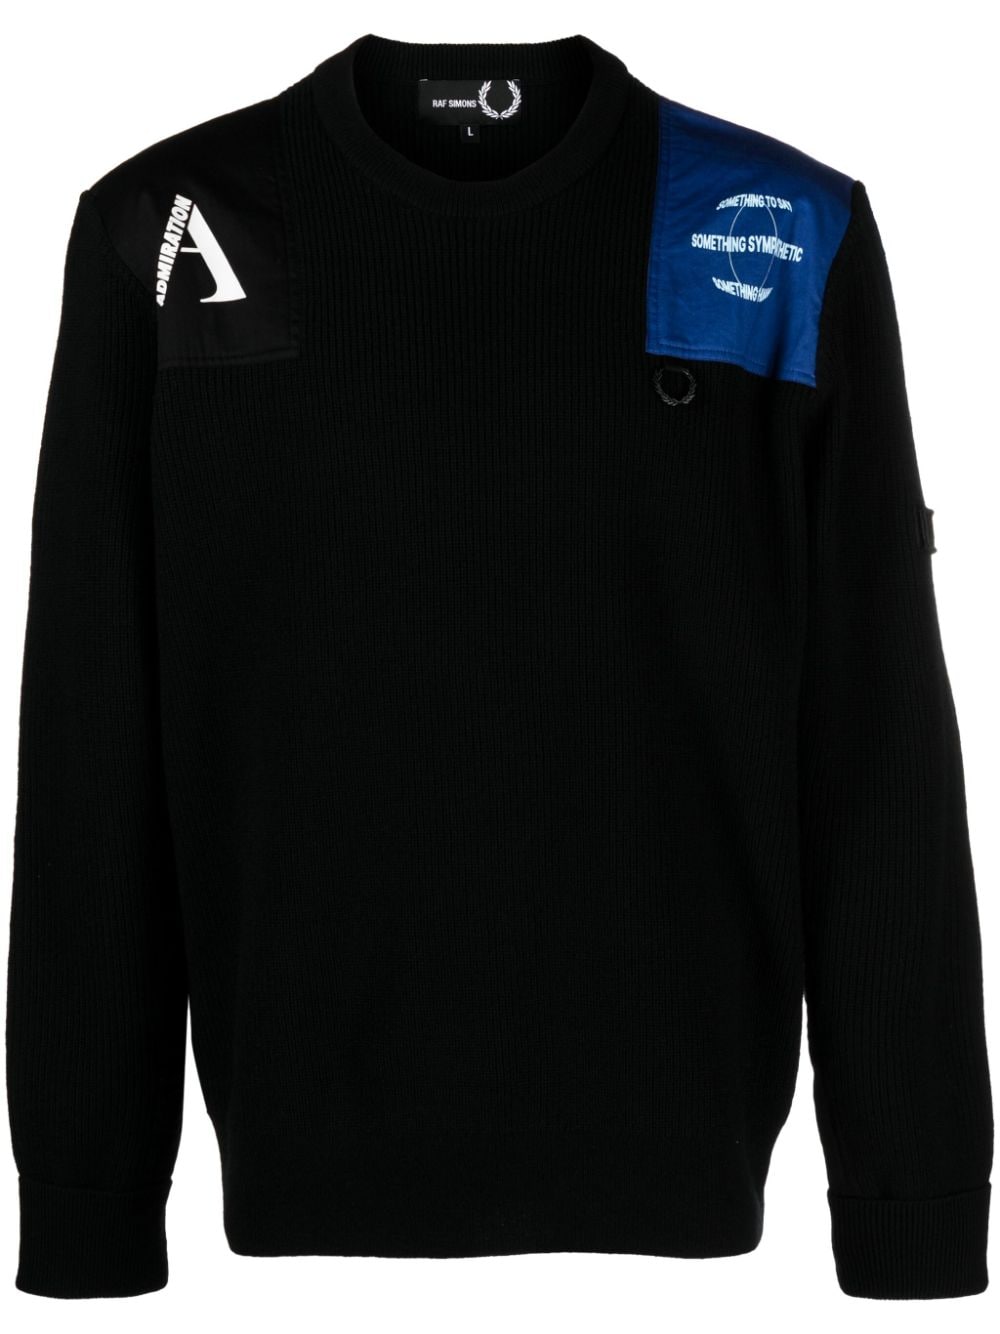 Raf Simons X Fred Perry Pullover mit Patch-Details - Schwarz von Raf Simons X Fred Perry